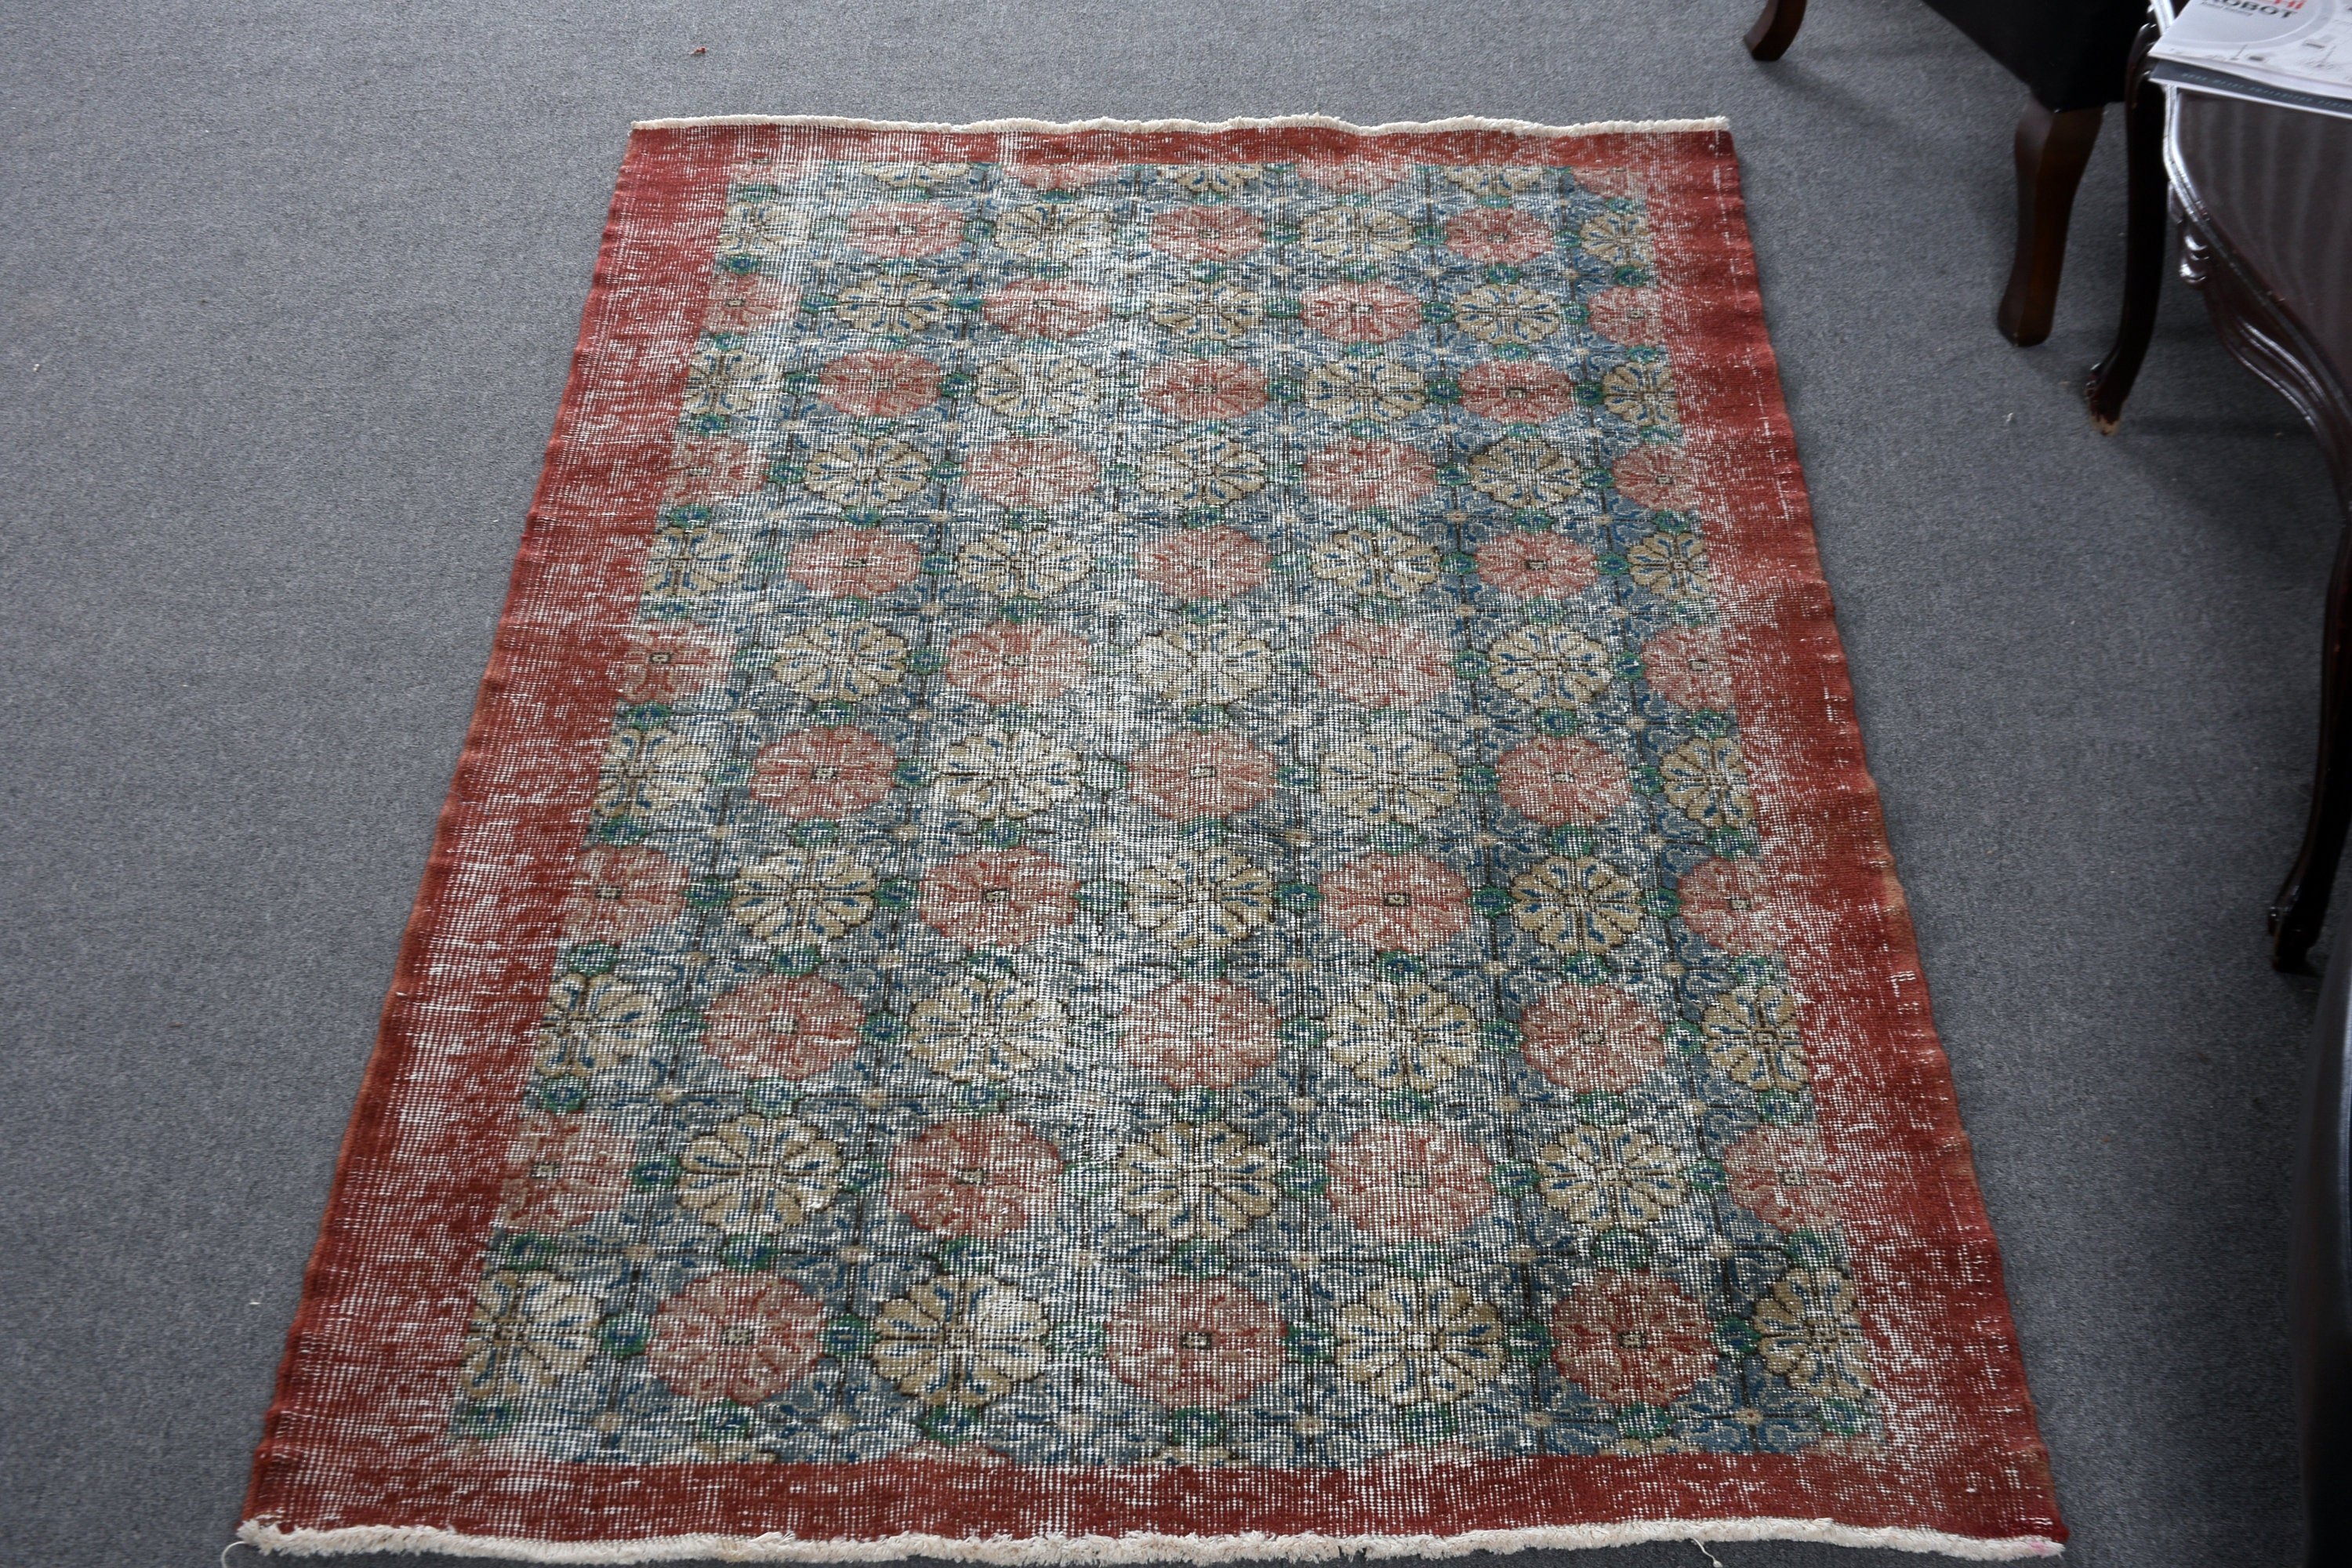 3.8x6.8 ft Area Rugs, Rugs for Indoor, Pale Rug, Turkish Rugs, Kitchen Rug, Red Antique Rugs, Moroccan Rug, Oushak Rugs, Vintage Rug